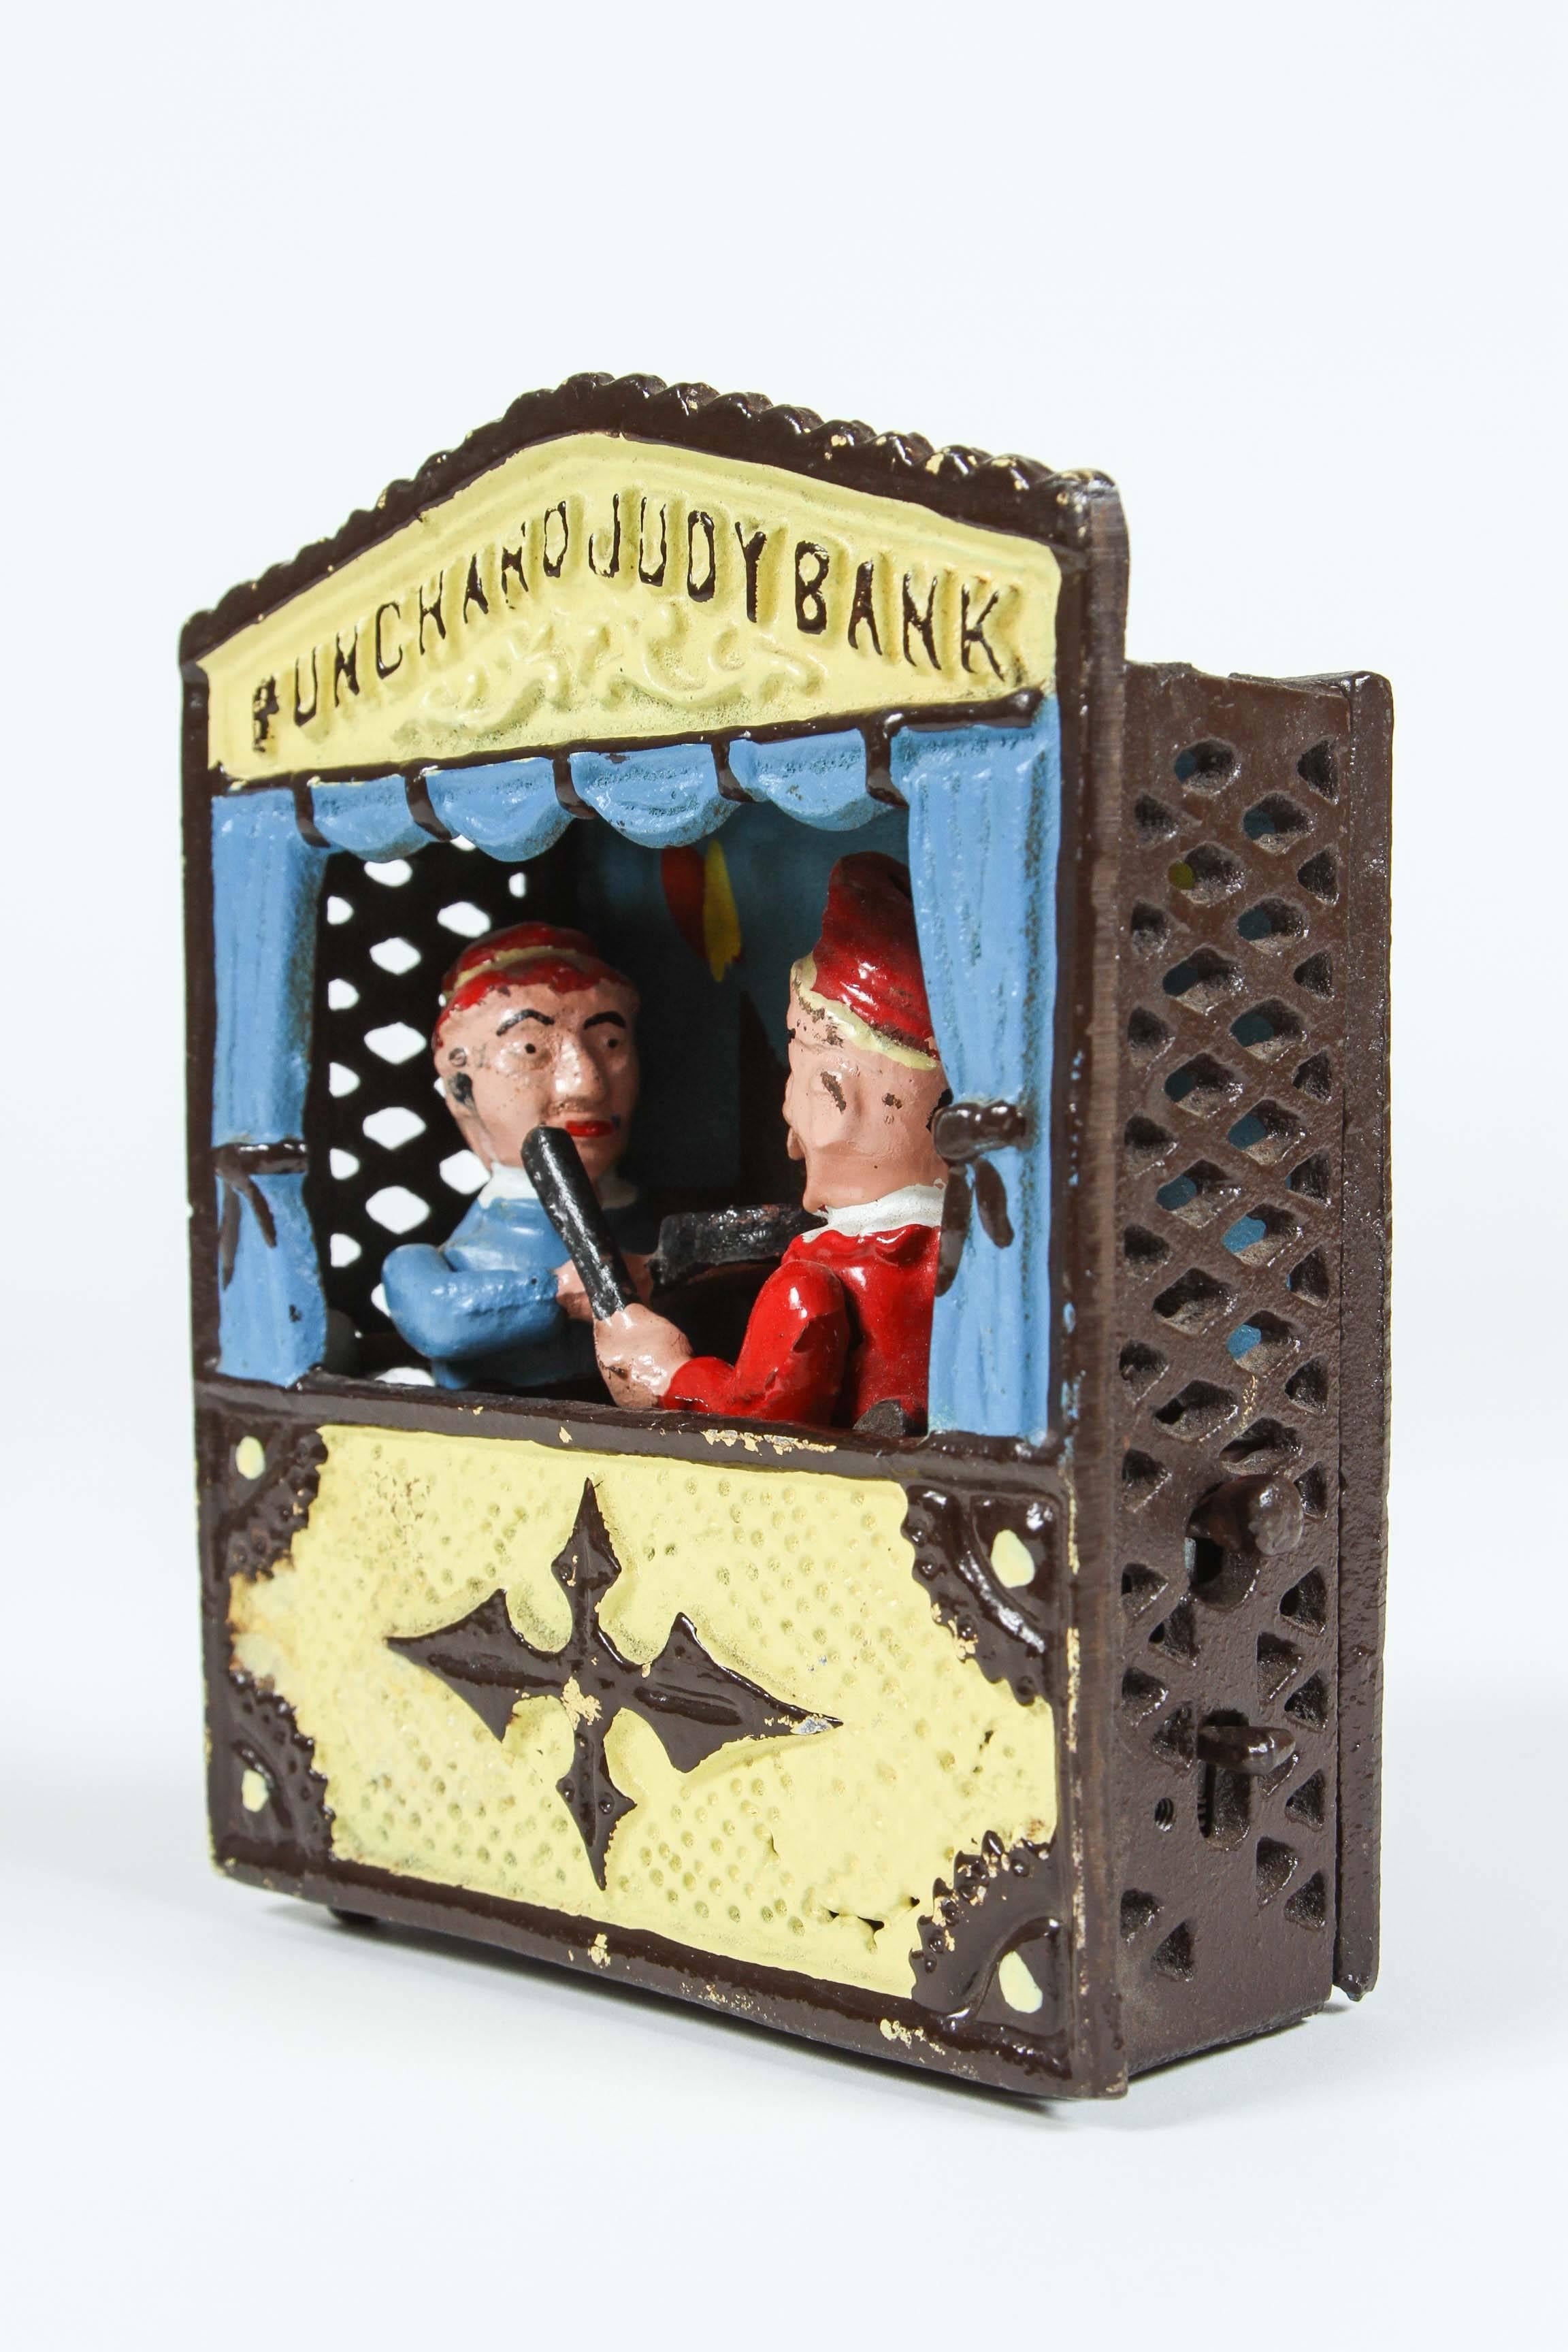 Vintage Cast Iron Book of Knowledge Mechanical Bank, Punch & Judy, 20th Century In Good Condition For Sale In North Hollywood, CA